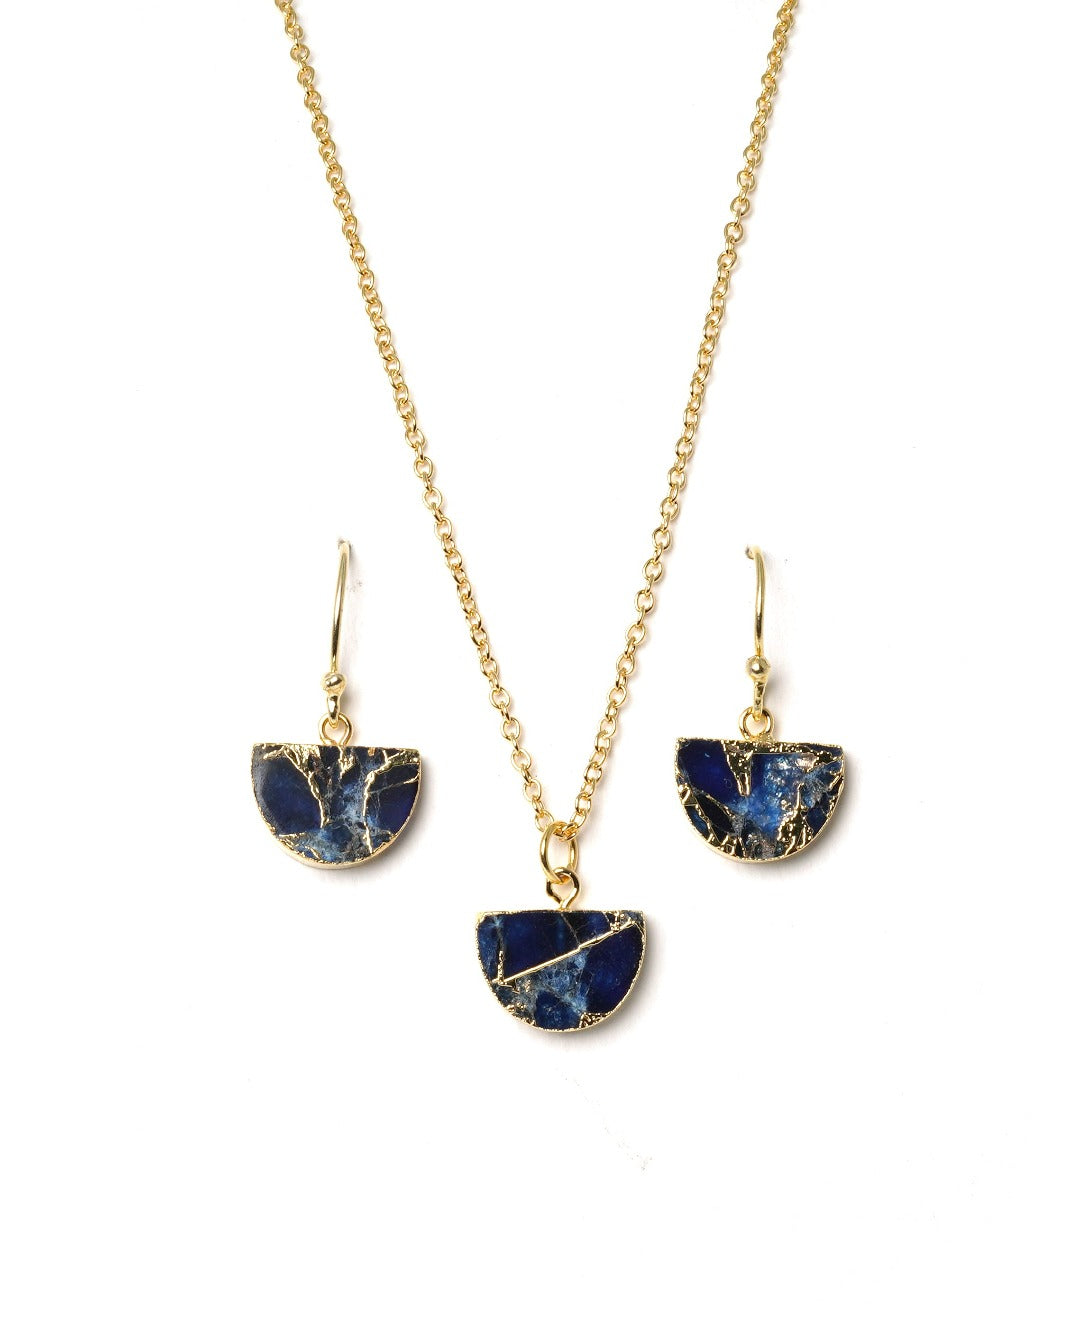 Half moon shaped midnight blue pendant with small earrings